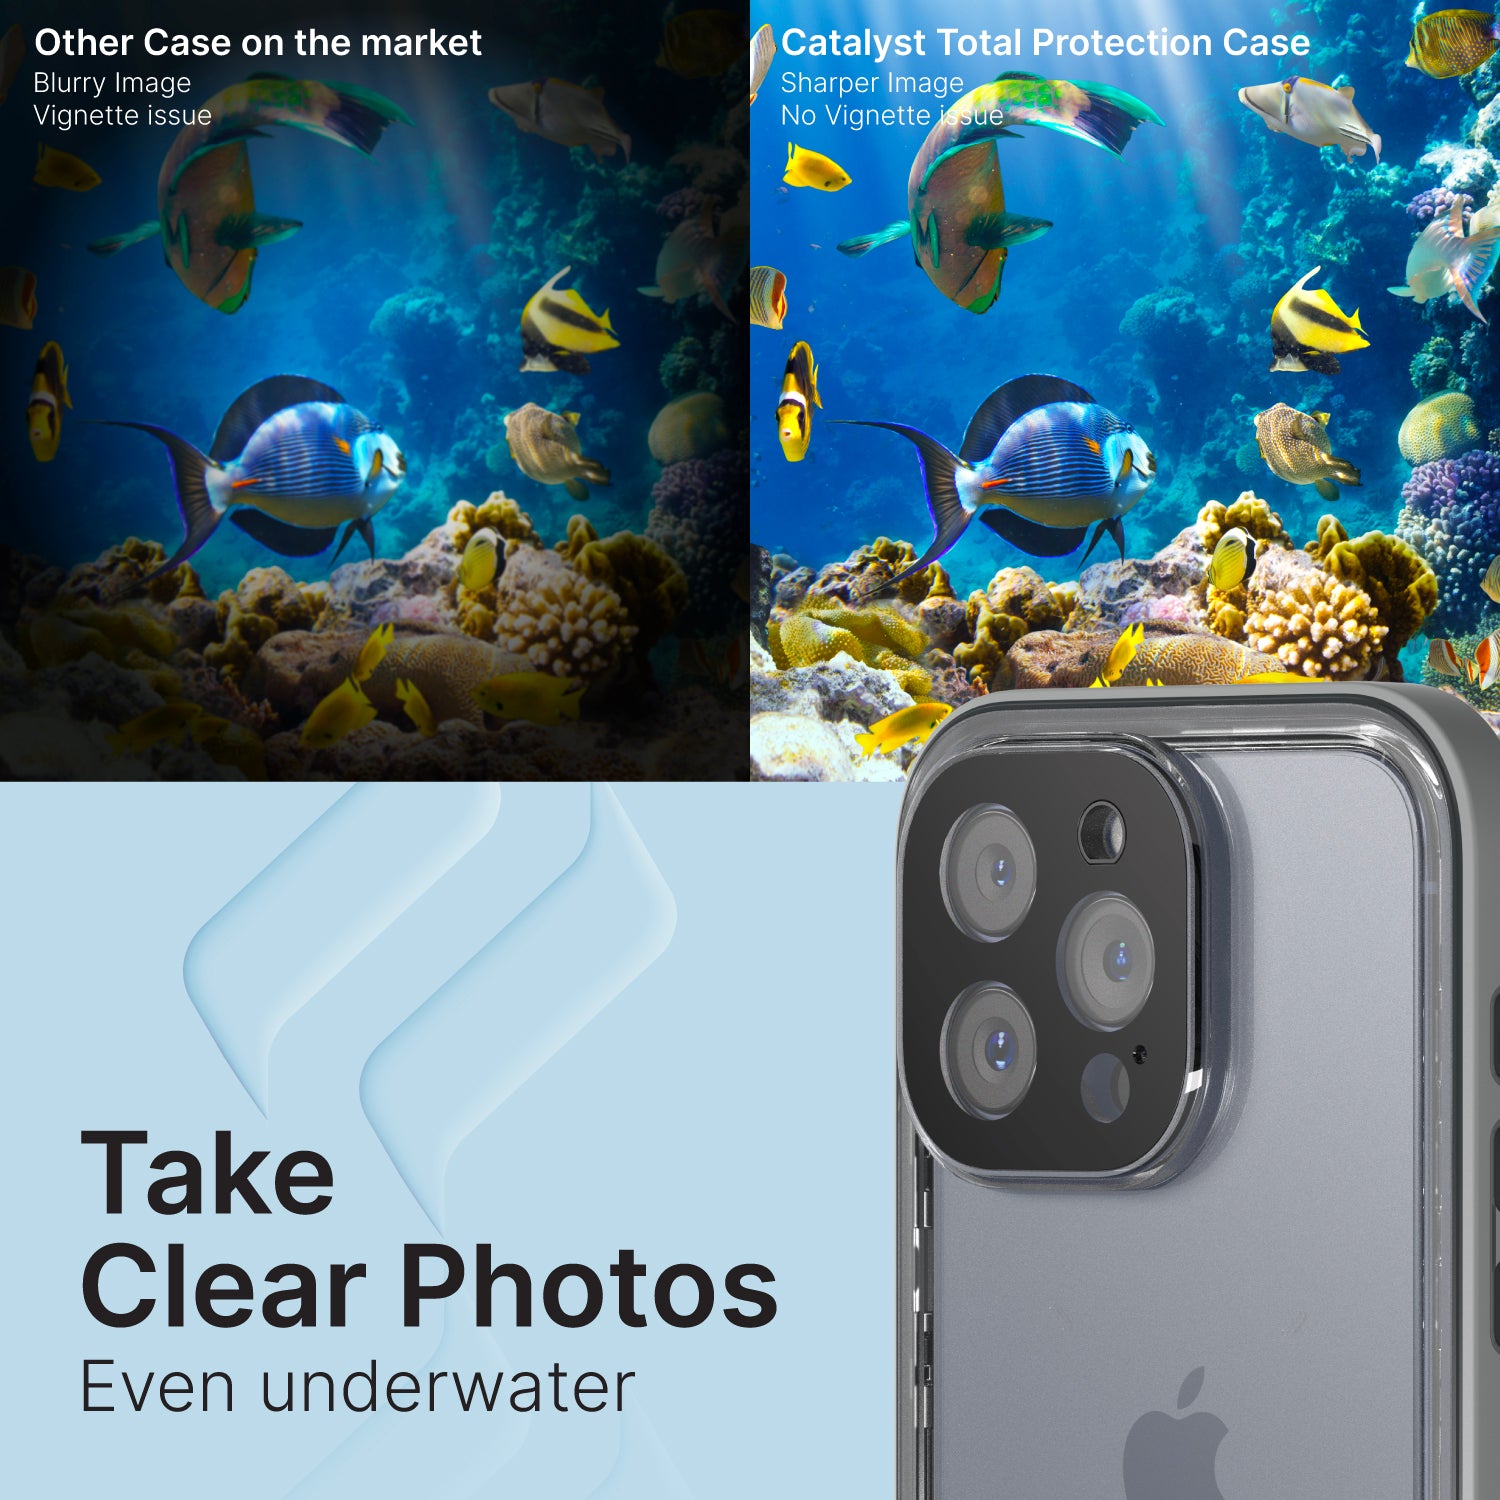 Catalyst iphone 15 pro/15 pro max waterproof case showing photos clearly taken underwater